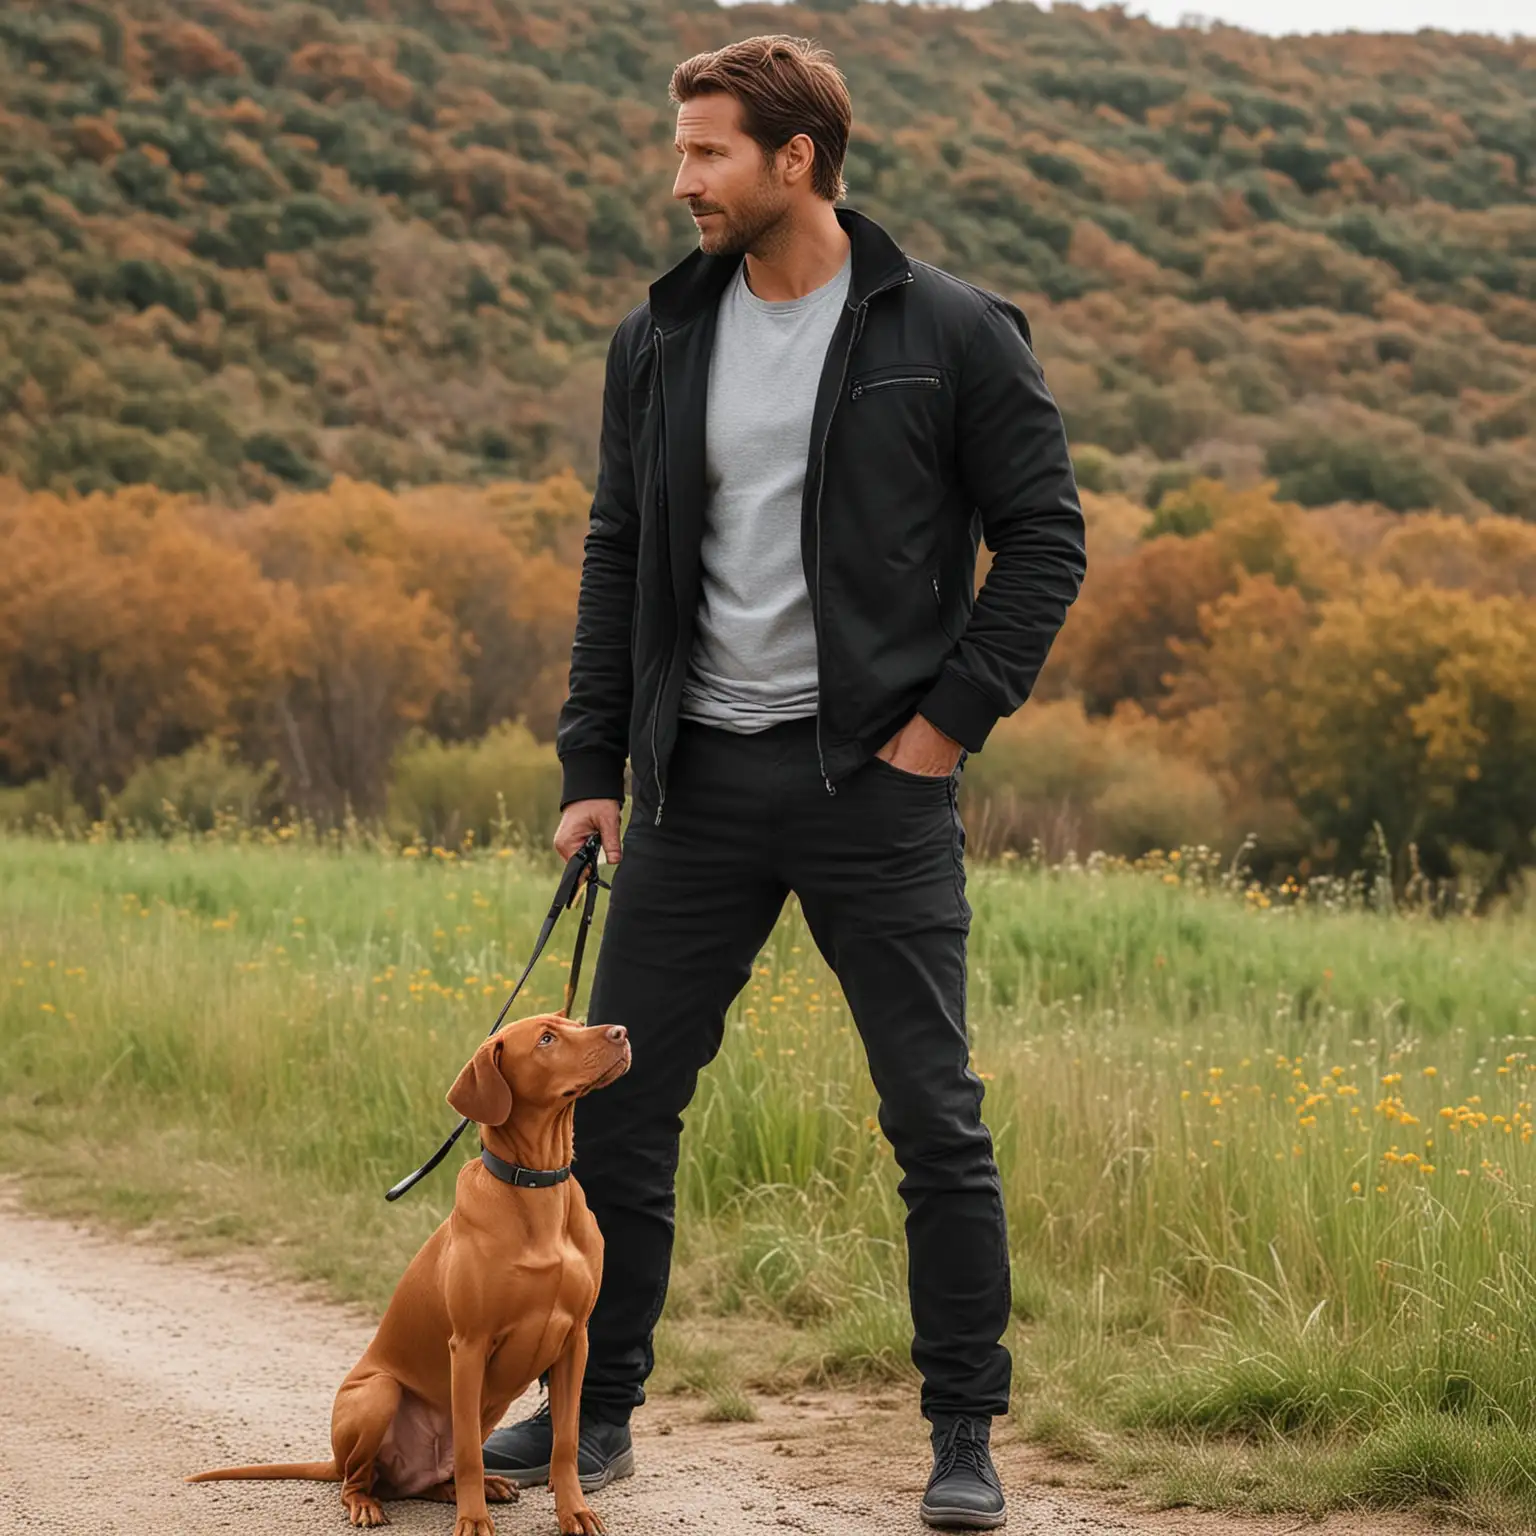 man with black jacket and dog who is orange Vizsla who is looking for something in distance, and the man looks like bradley cooper, it is summer

